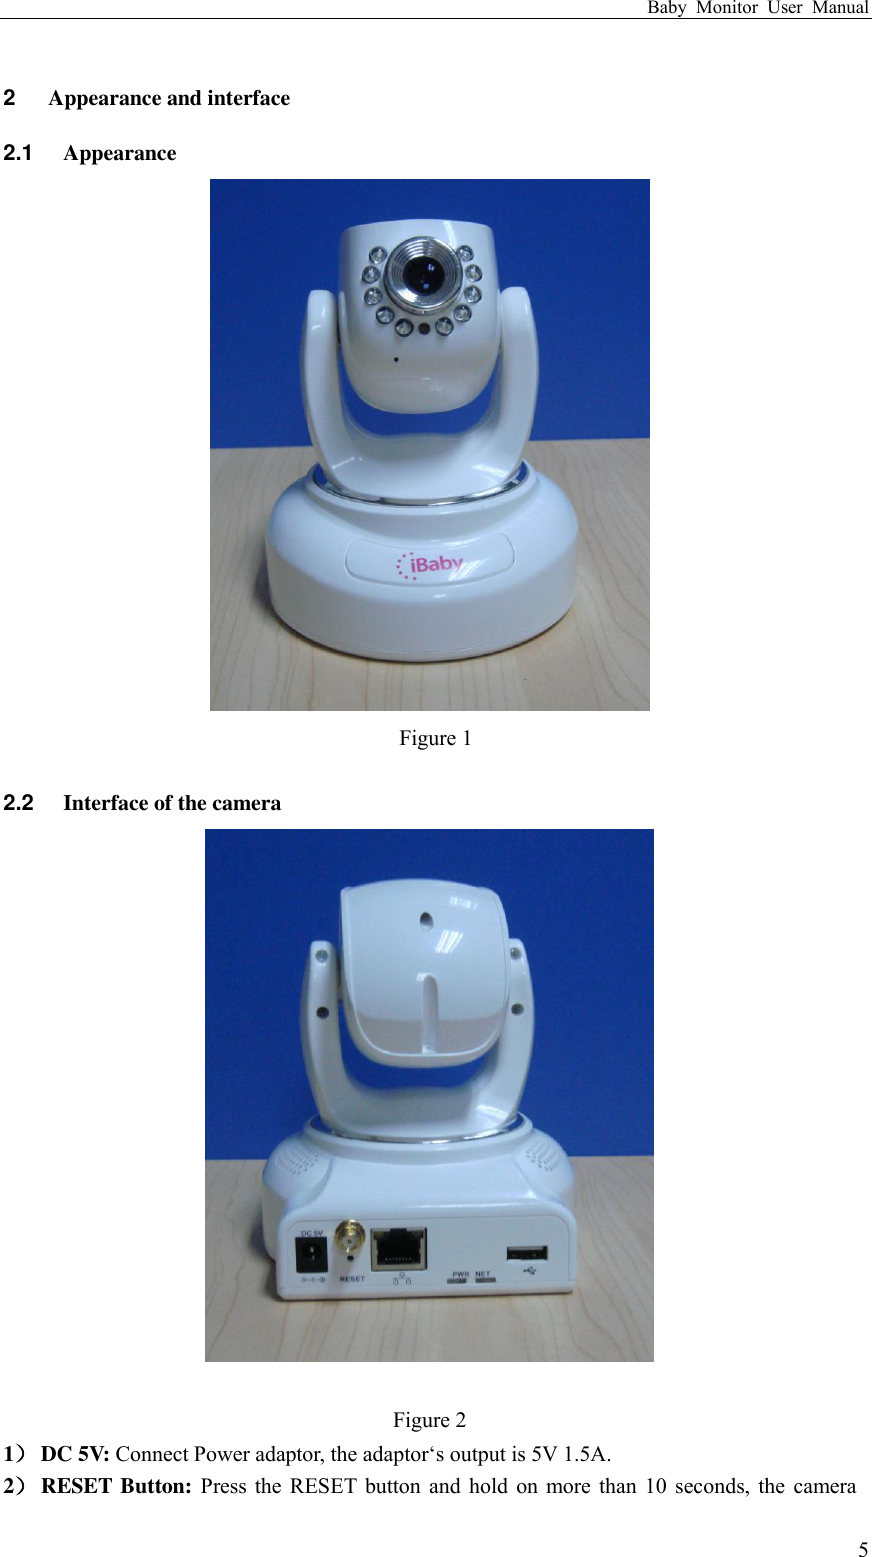 Baby  Monitor  User  Manual  5 2  Appearance and interface 2.1  Appearance  Figure 1  2.2  Interface of the camera   Figure 2 1） DC 5V: Connect Power adaptor, the adaptor„s output is 5V 1.5A. 2） RESET Button: Press the RESET button and hold on more than 10 seconds, the camera 